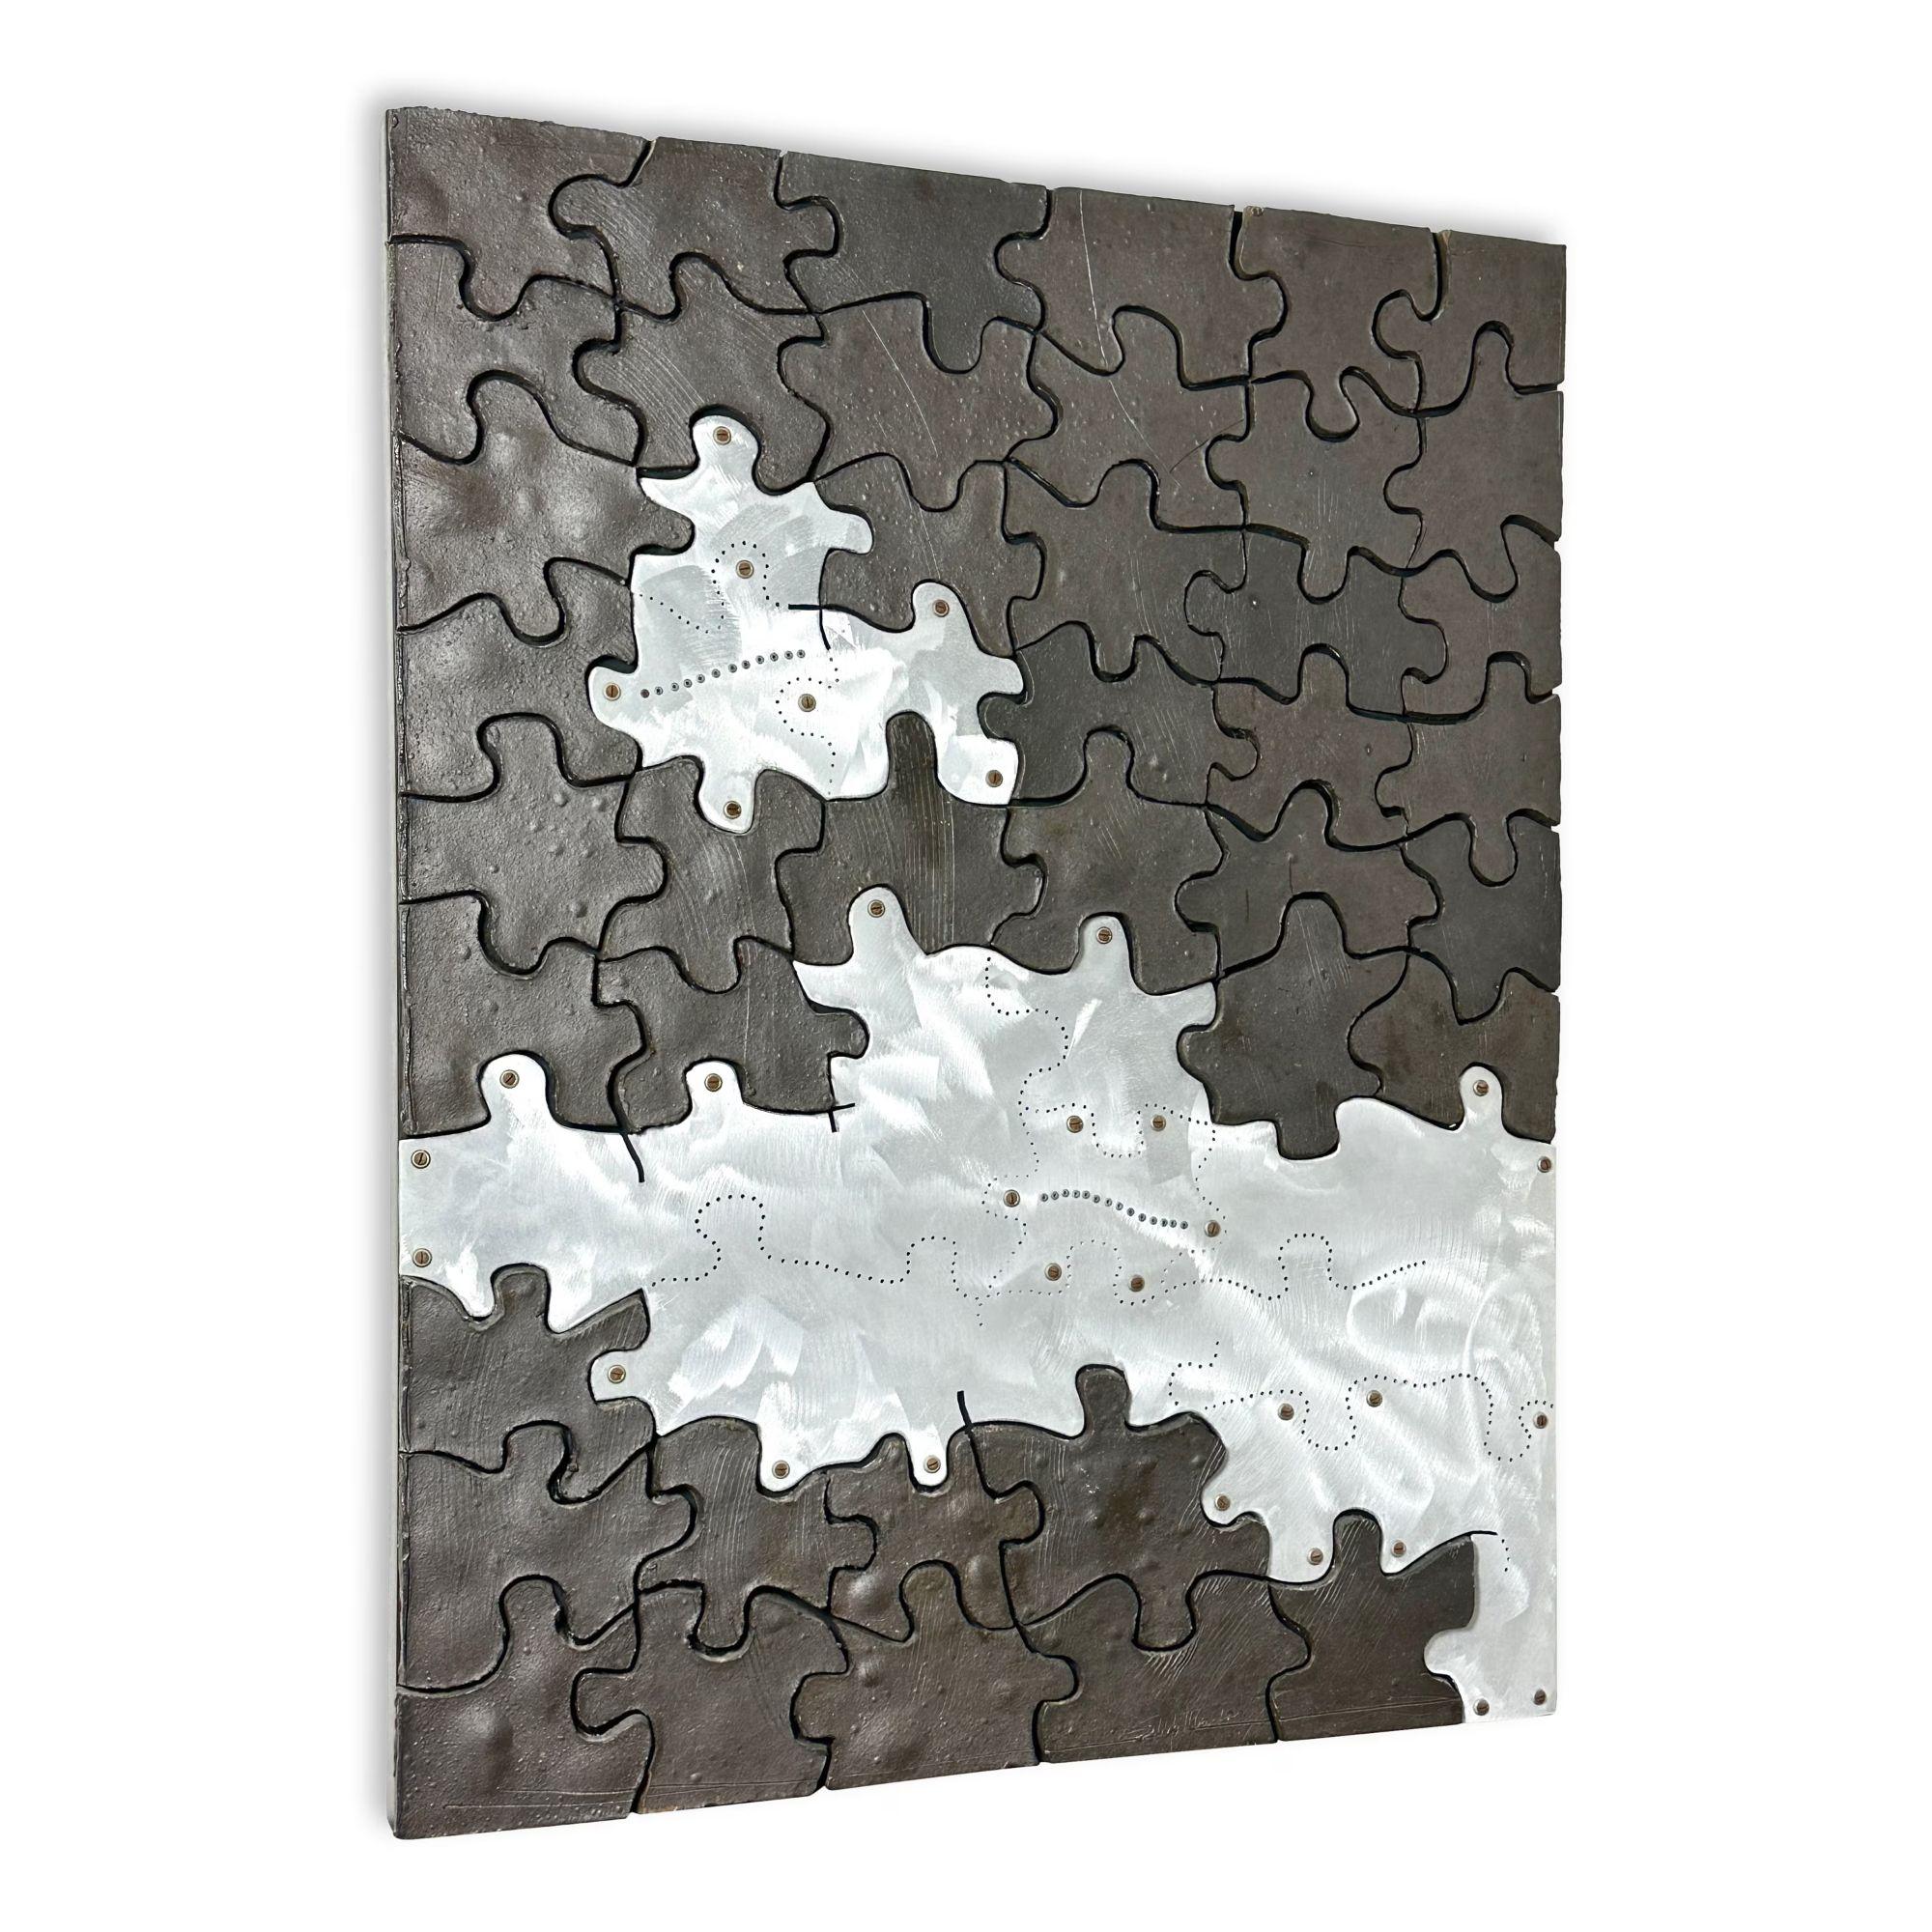 46x36 Mid Century Modern Ceramic Puzzle Mosaic Wall Sculpture by John Stephenson 

Incredible modern art wall sculpture by Michigan artist John Stephenson 1975
High fire clay and aluminum puzzle titled Ecological Jig #7
Mounted to wood frame and